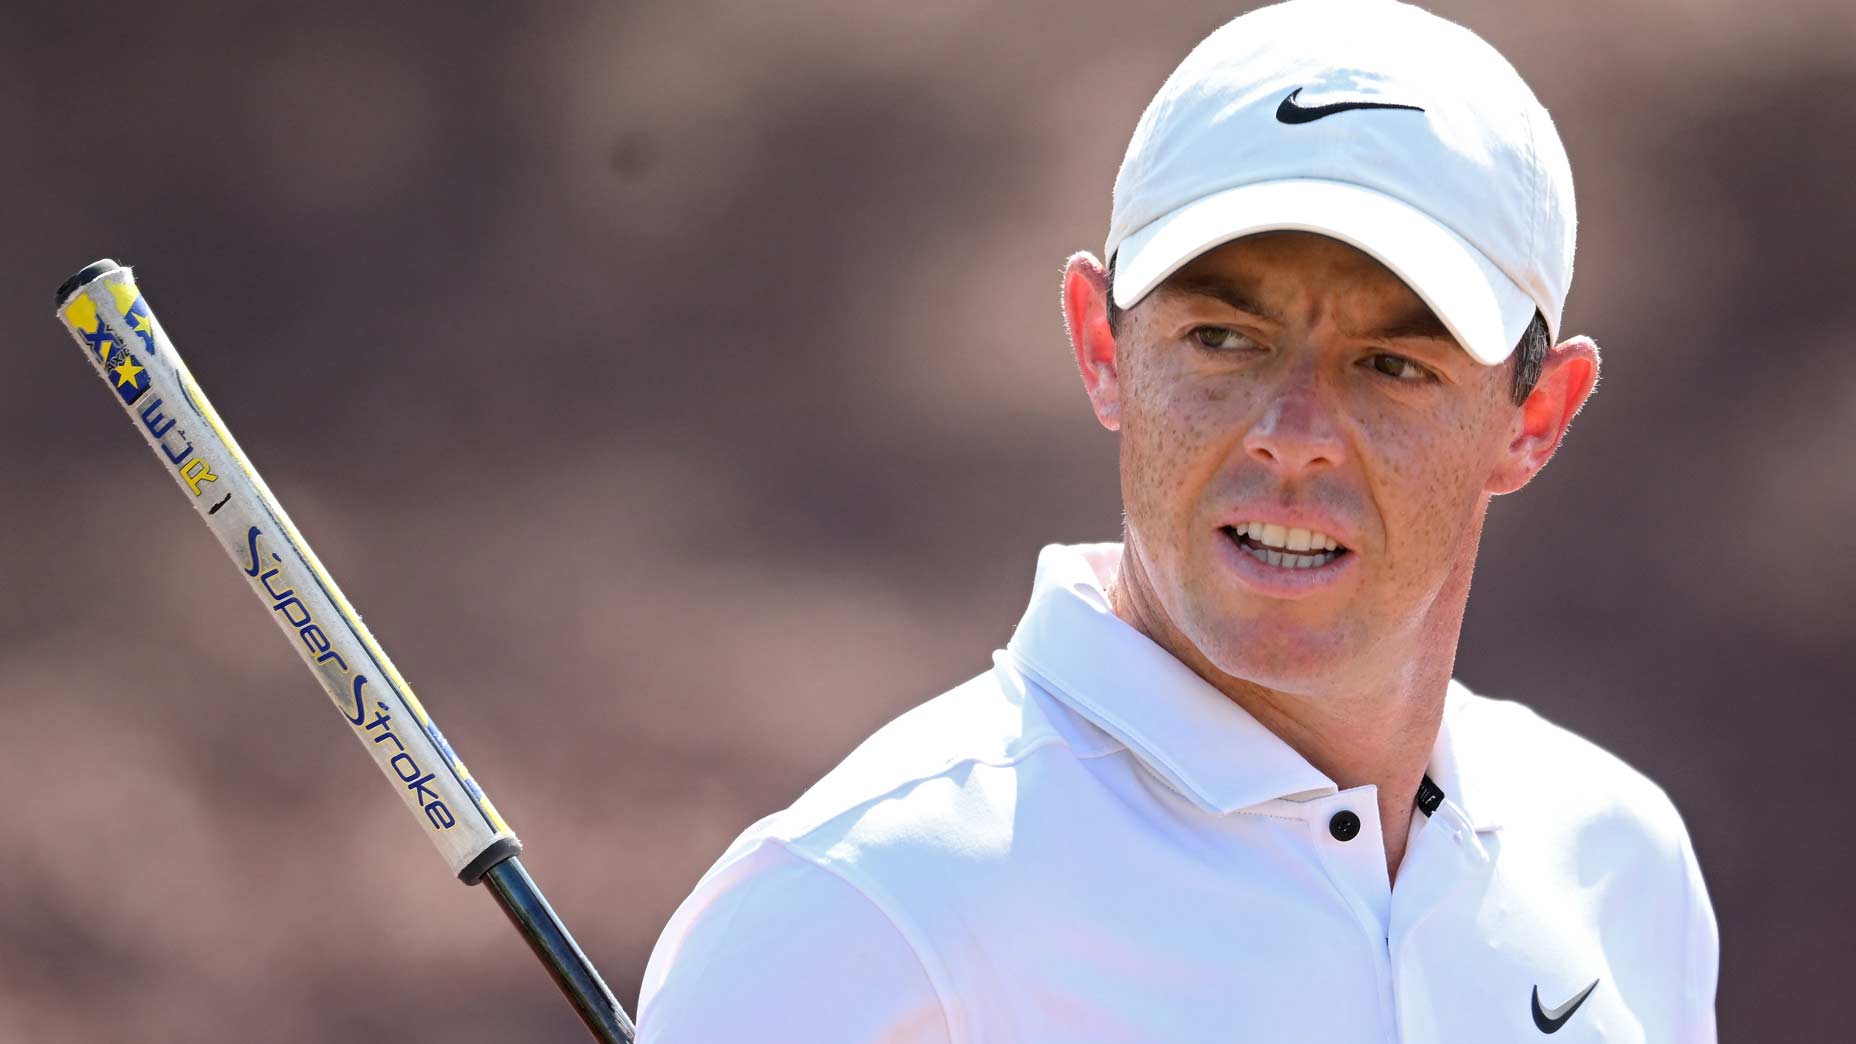 Rory McIlroy explained the origins of his feud with Greg Norman.